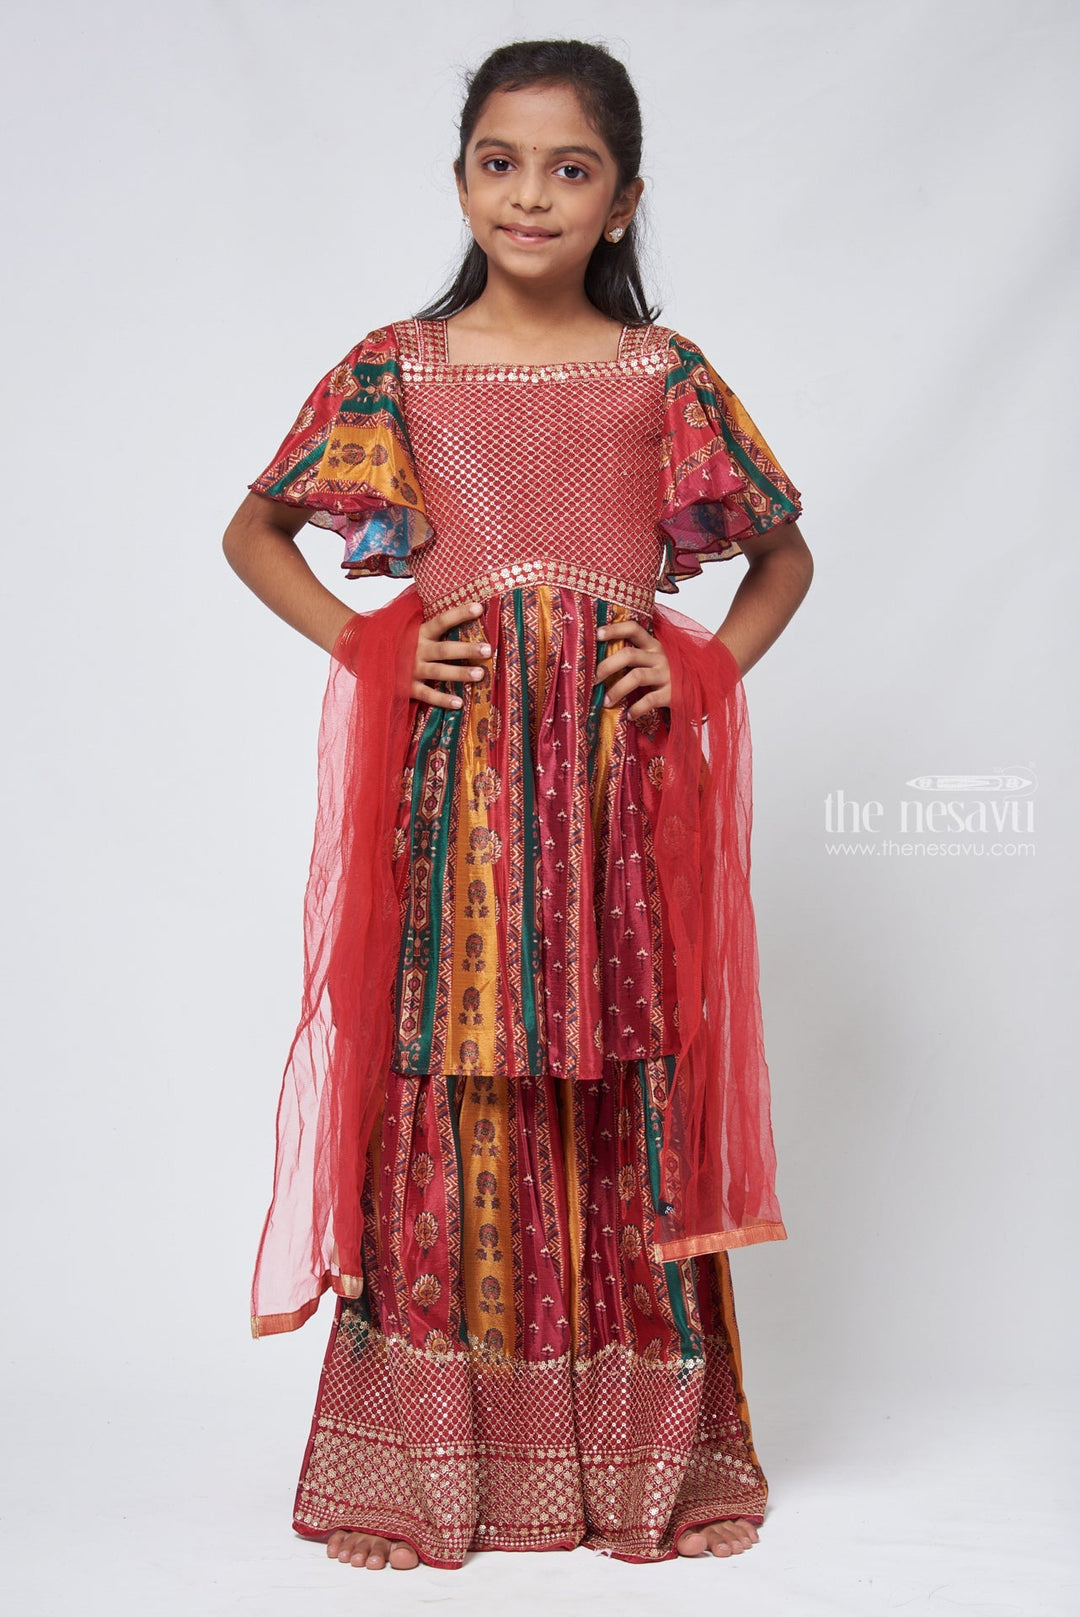 The Nesavu Girls Sharara / Plazo Set Elegant Sequin Embroidered Floral Red Kurti paired with Palazzo Festive Charm for Girls Nesavu 24 (5Y) / Brown / Chinnon Chiffon GPS161A-24 Kurti With Sharara Set For Girls | Stylish Kurti And Palazzo Suit | The Nesavu